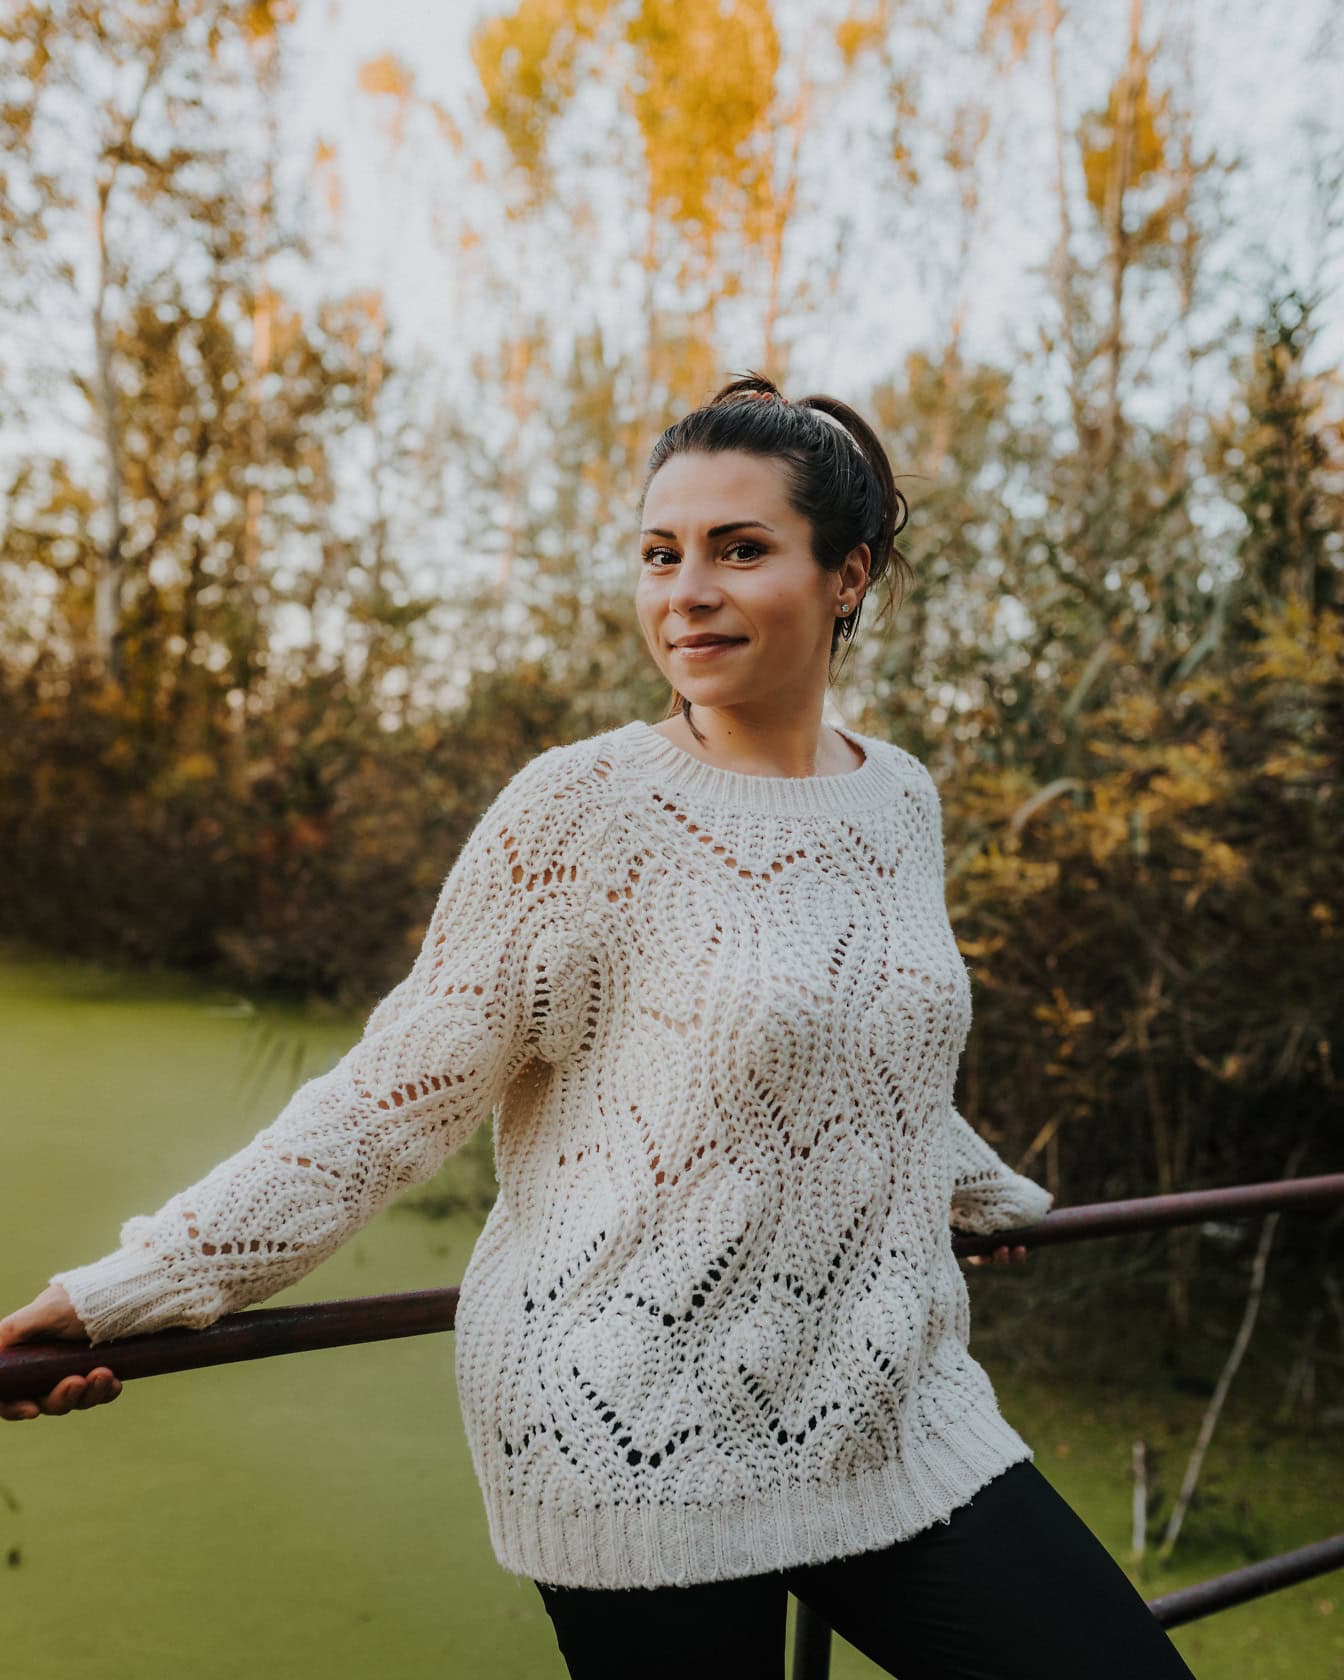 Beautiful brunette with discreet makeup in a handmade white sweater as she leans against the bridge fence across the canal